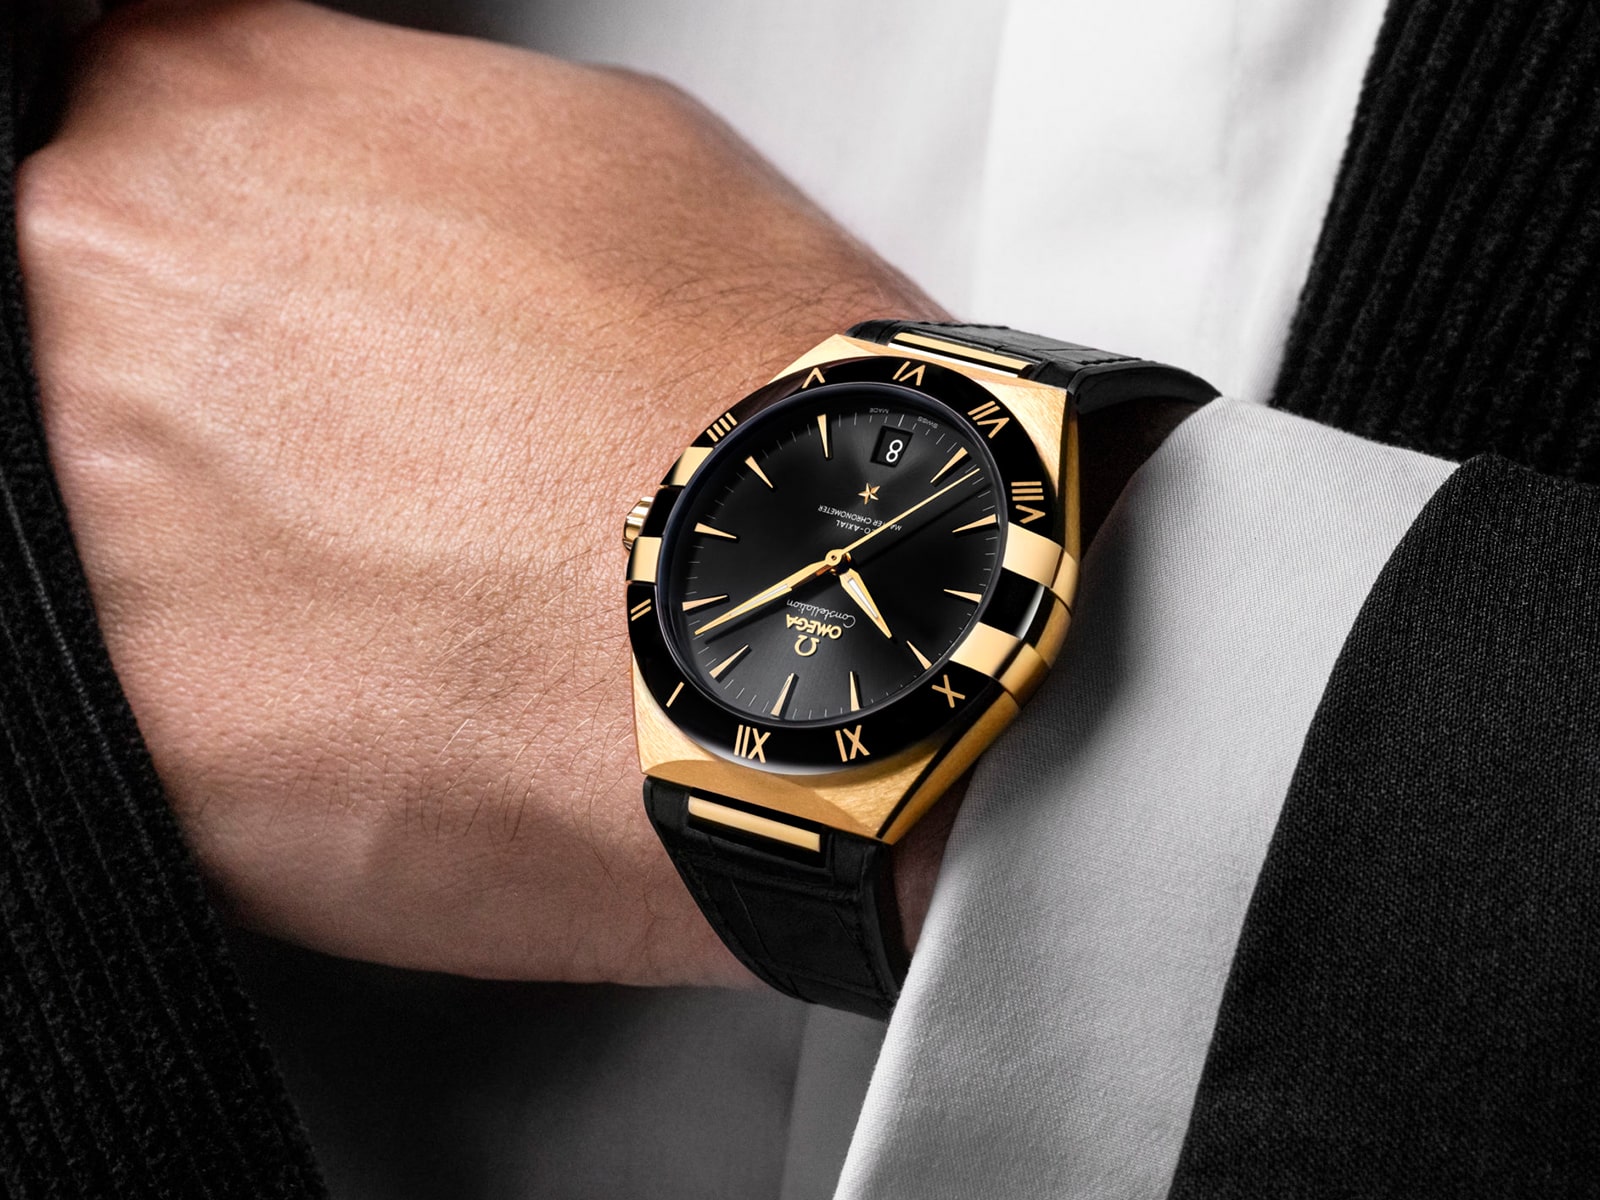 The 41 mm replica watch is designed for men.